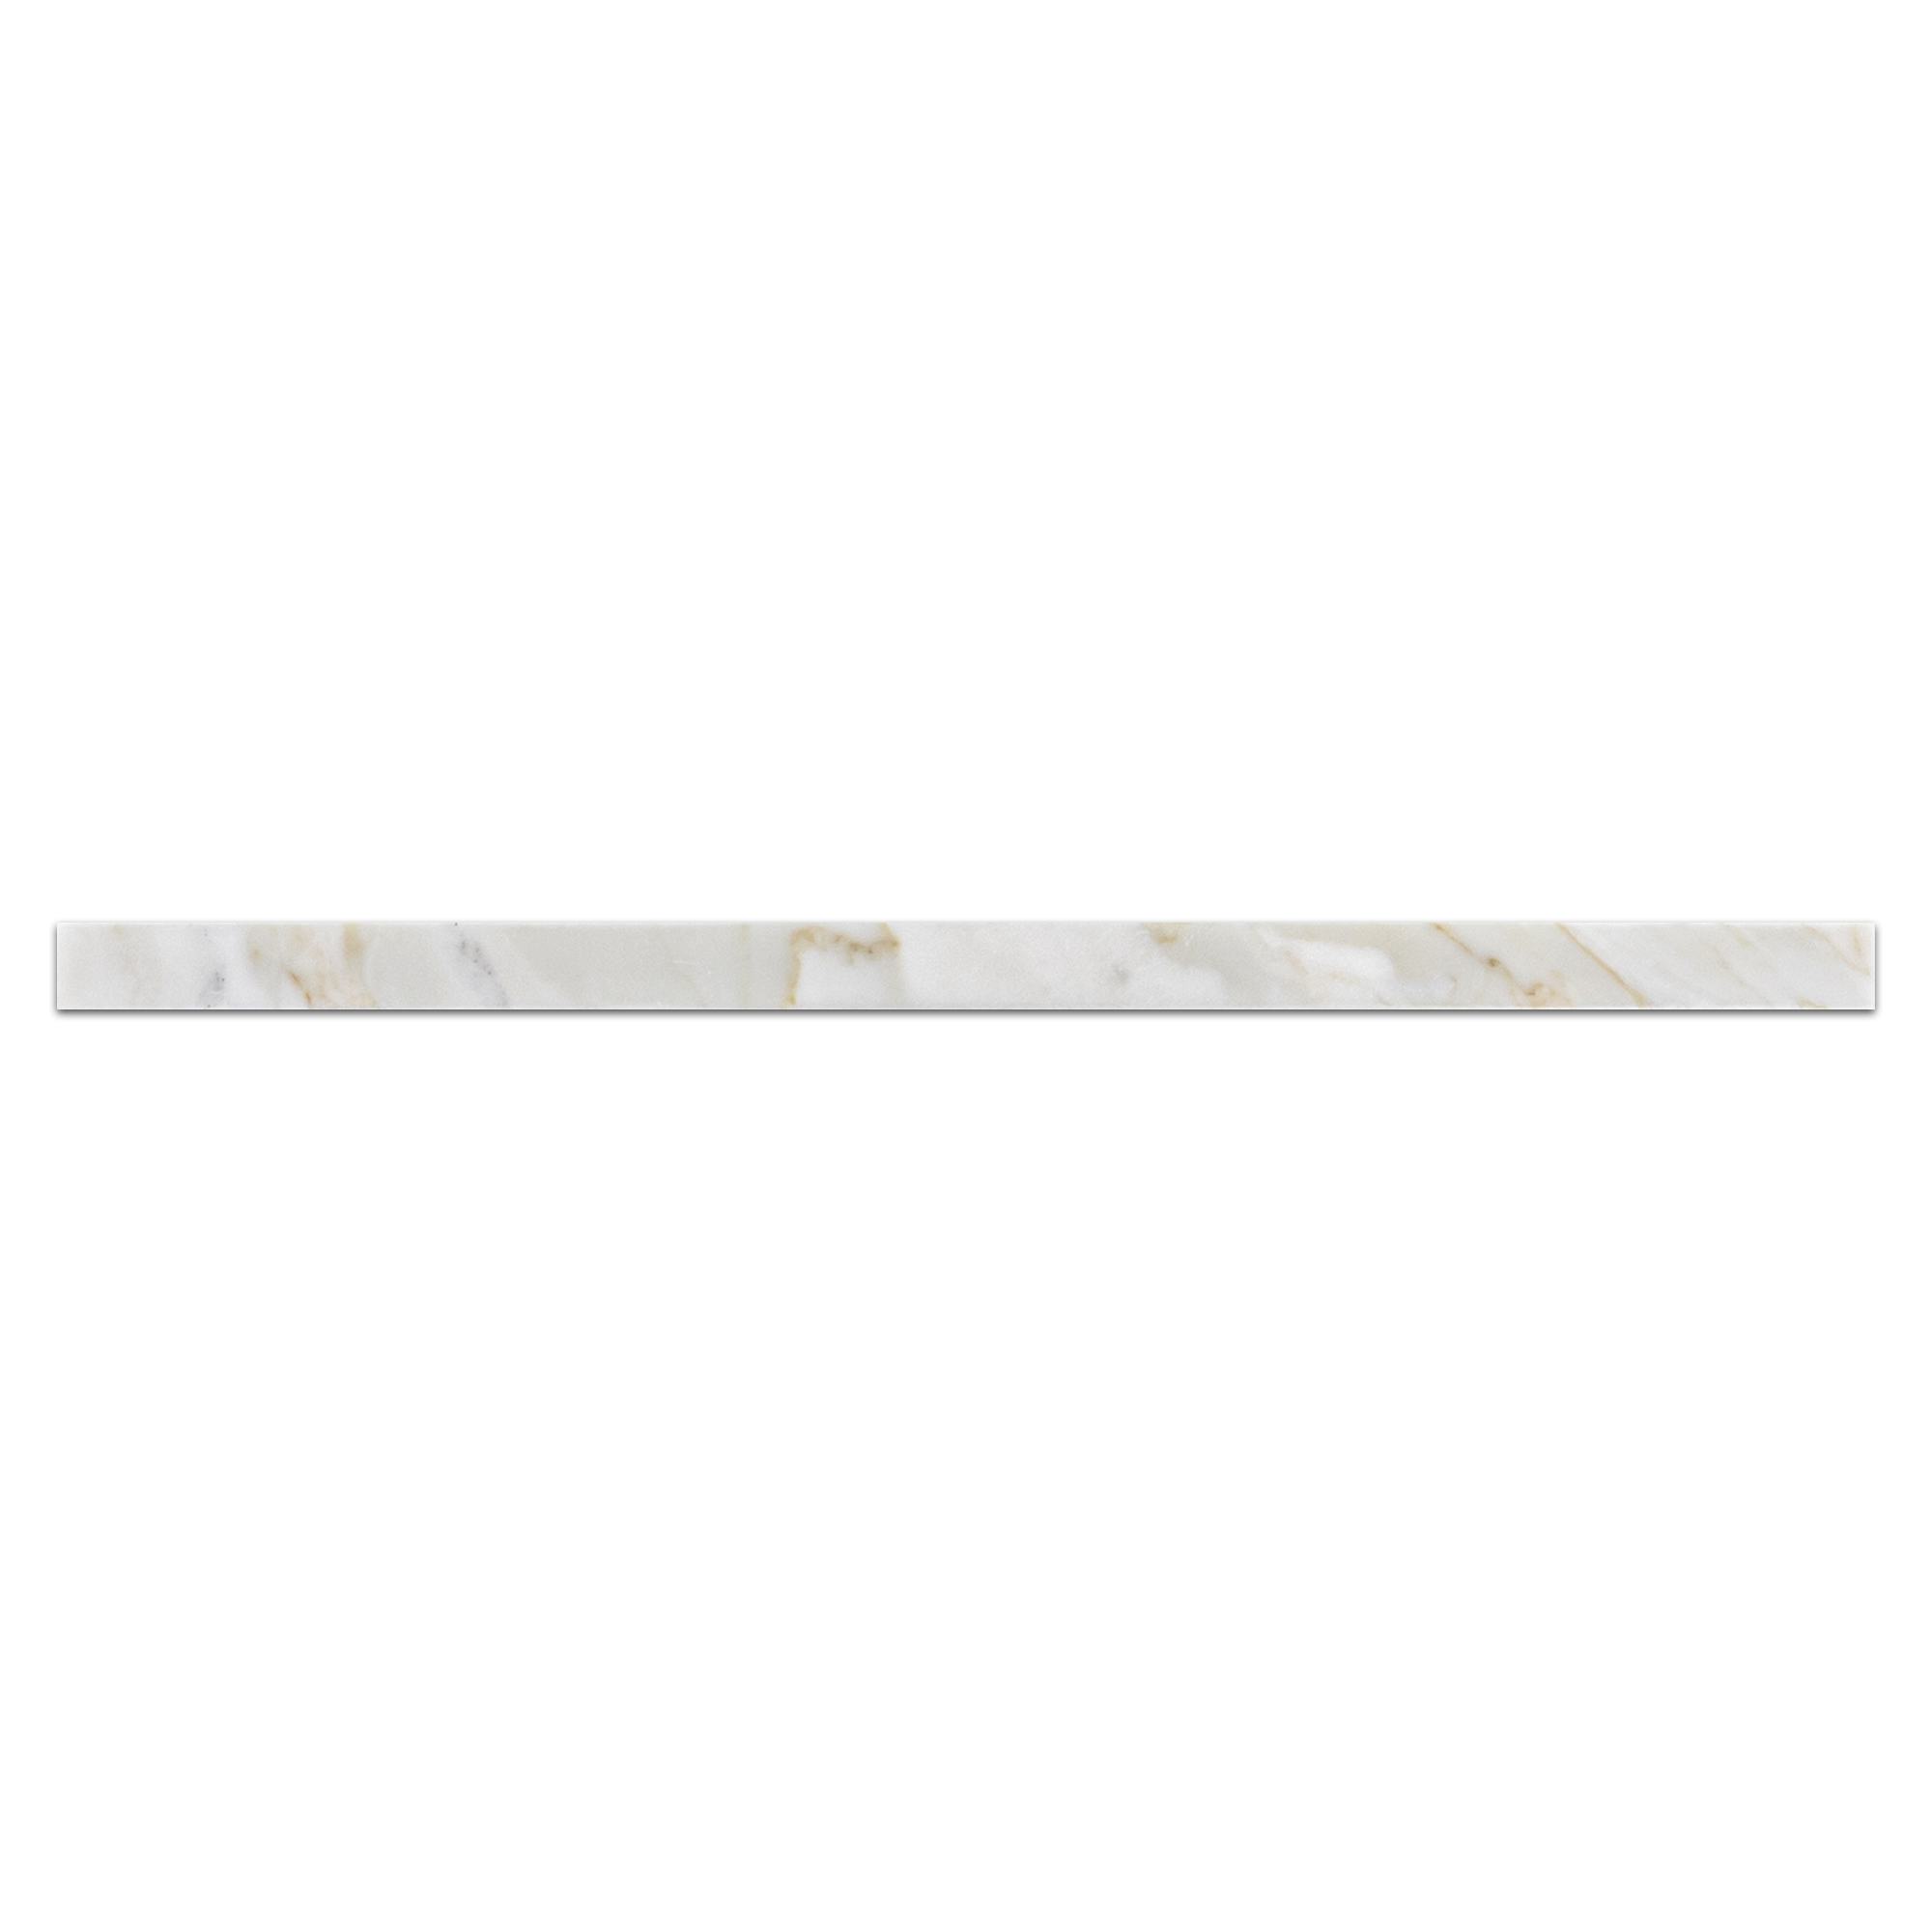 Elon Calacatta Gold Marble Flat Liner 0.5625x12x0.8125 Polished AM9065P Surface Group International Product